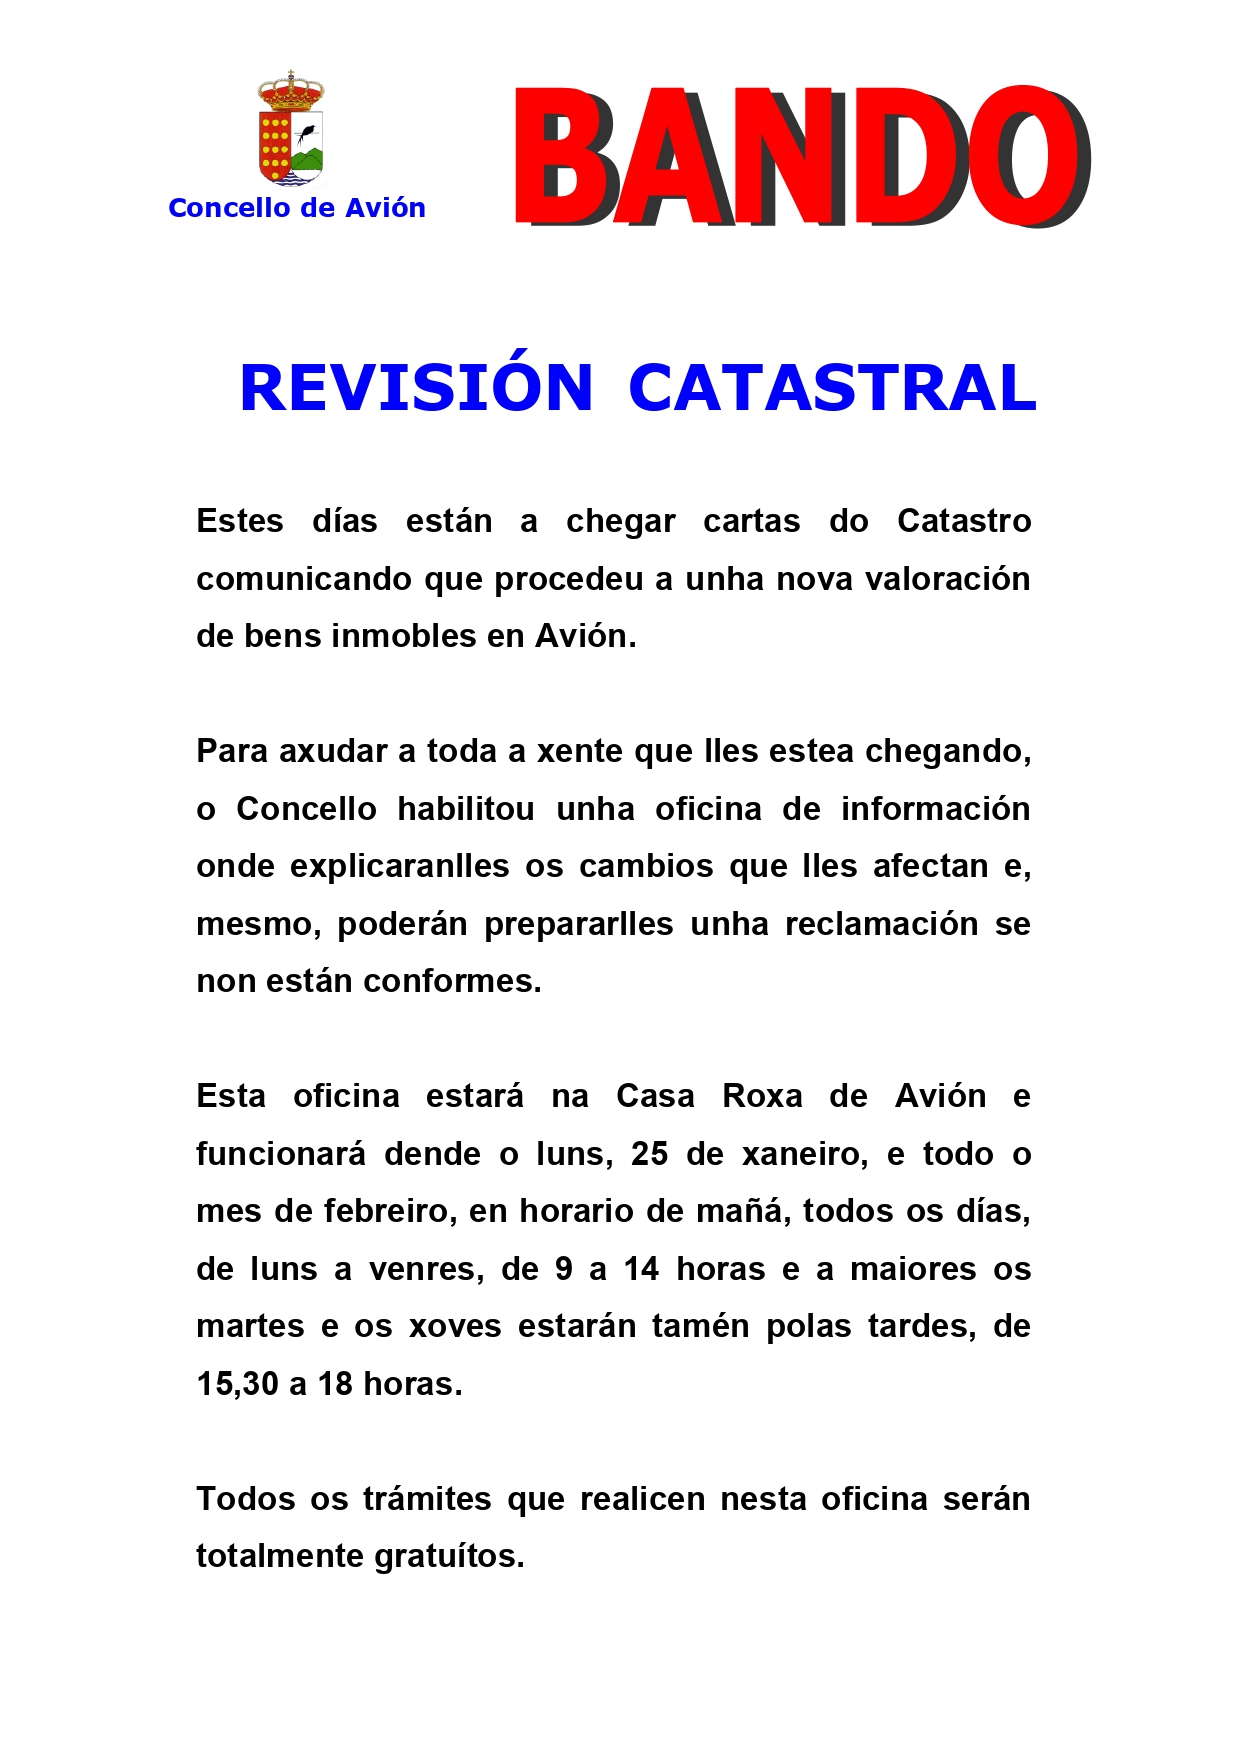 Revision Catastral